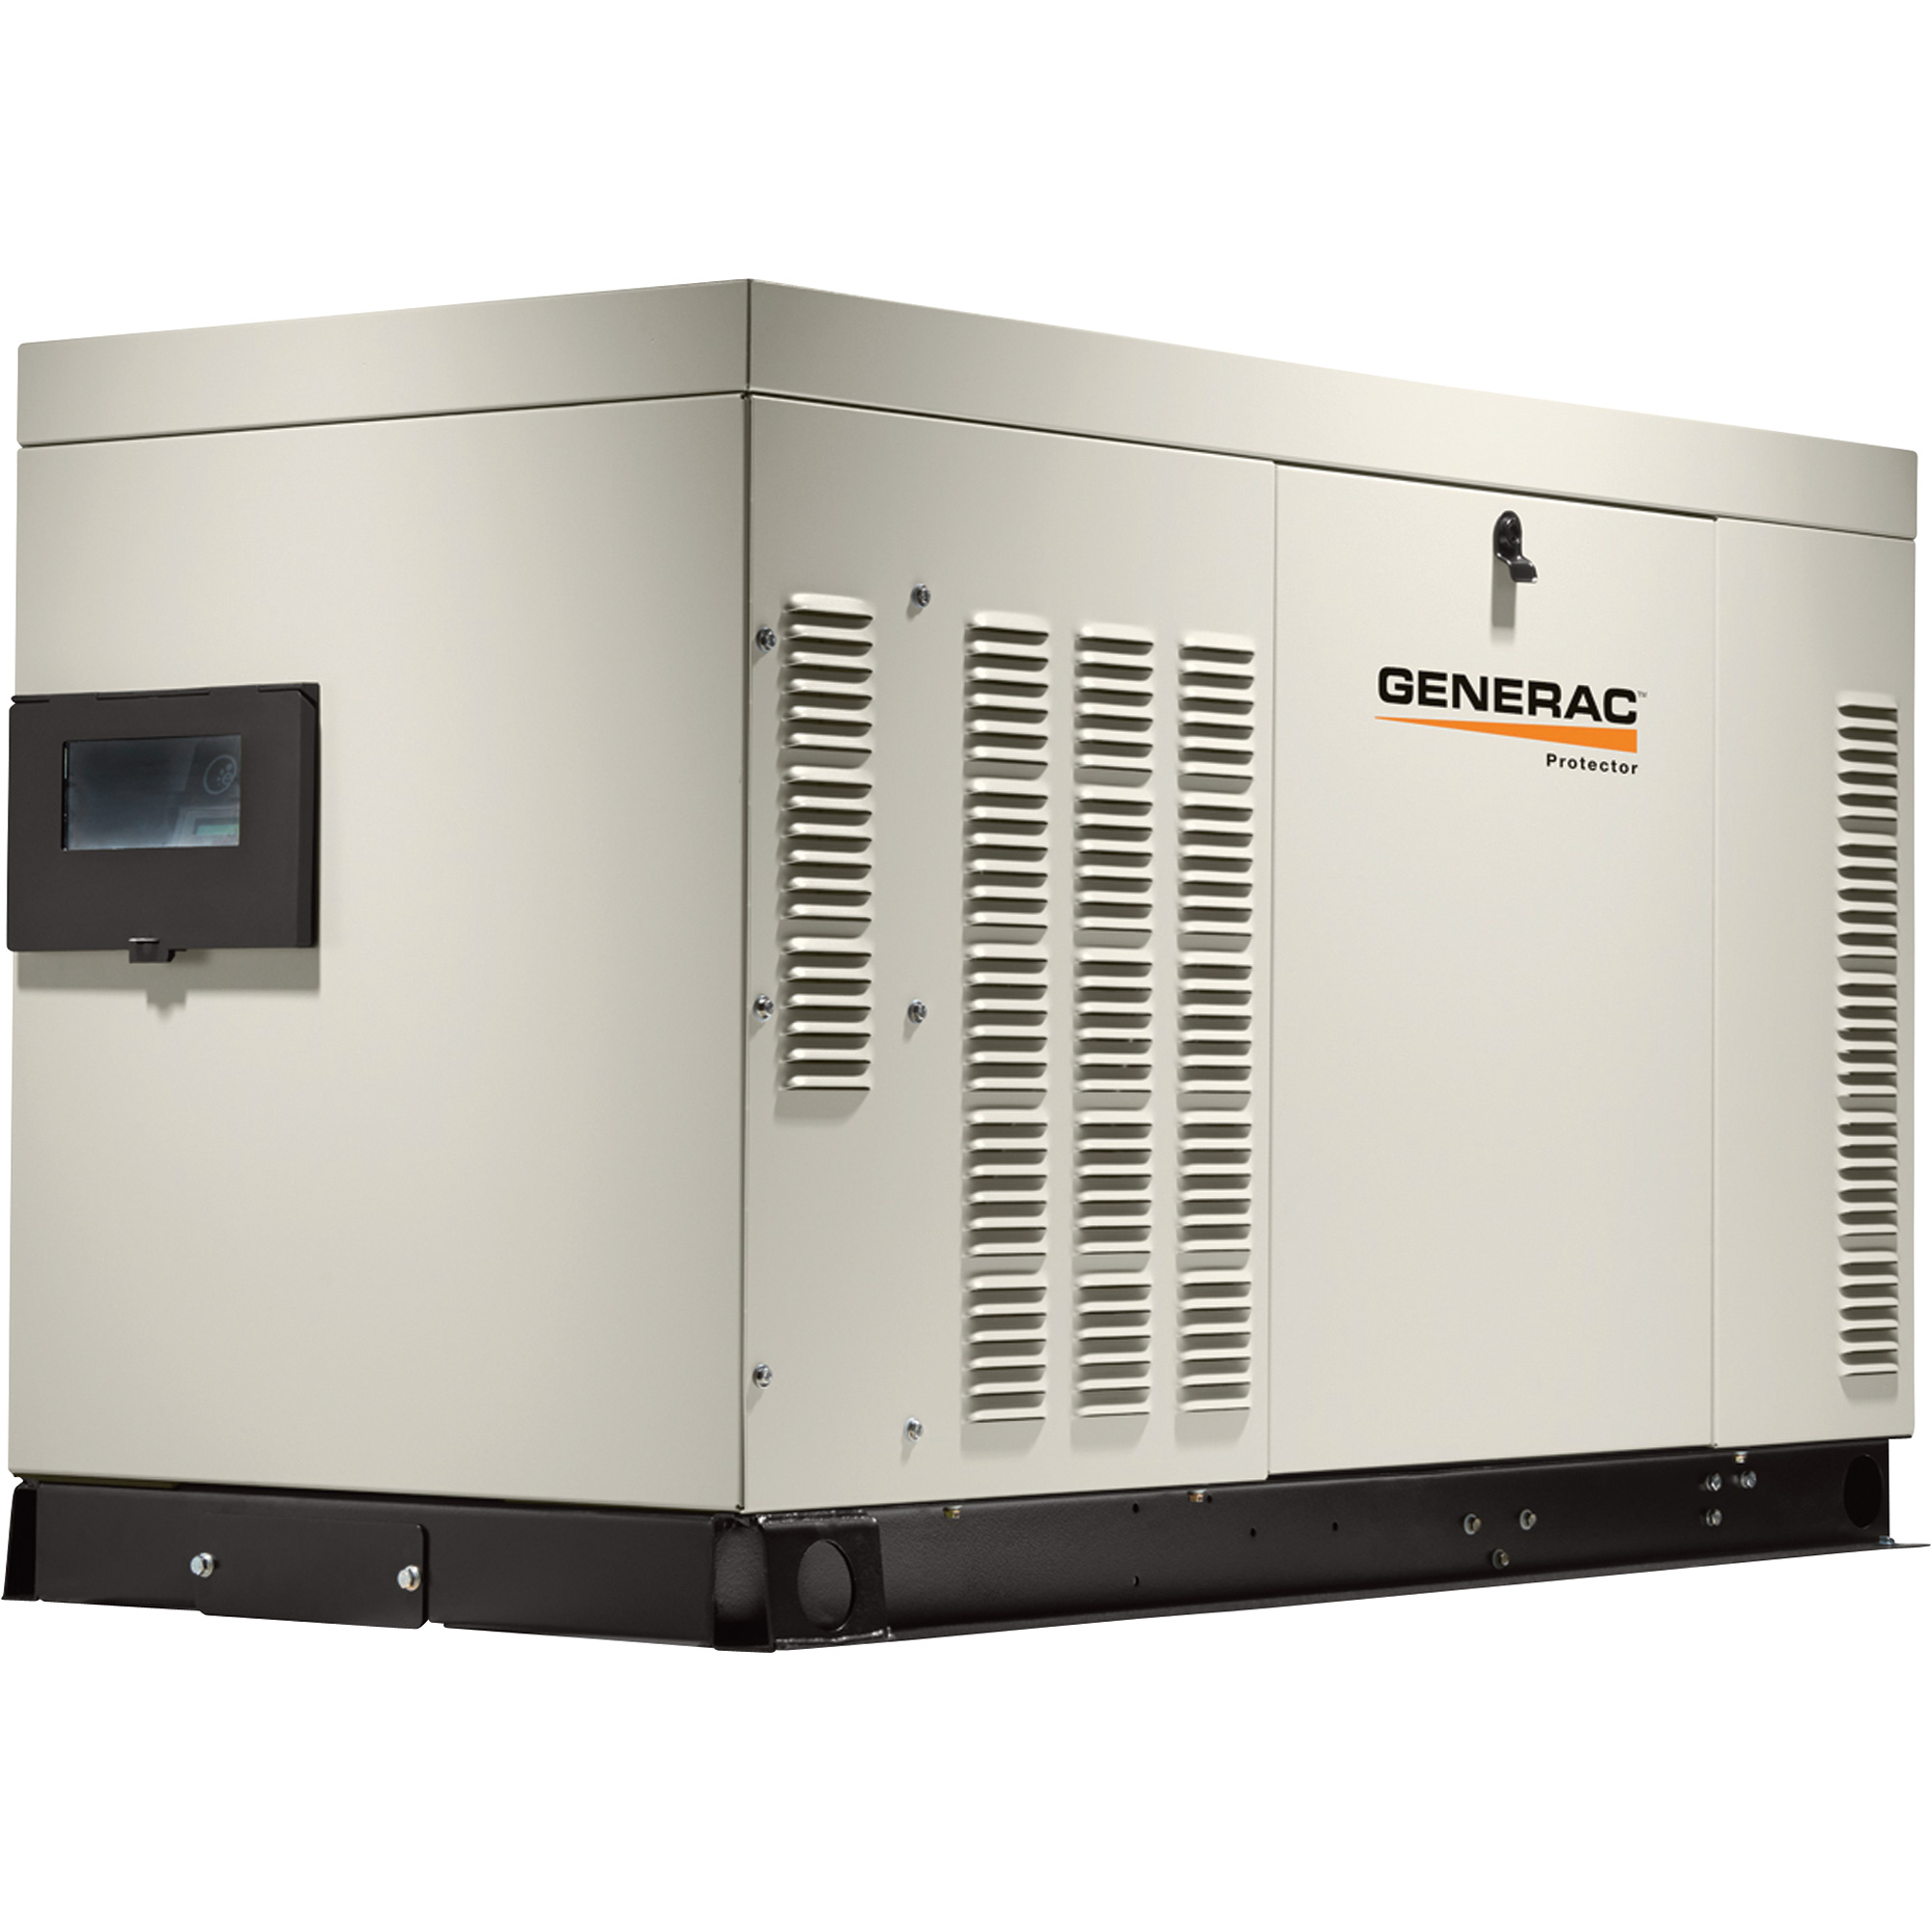 Generac Liquid Cooled Home Standby Generator 25 kW (LP) 25 kW (NG)